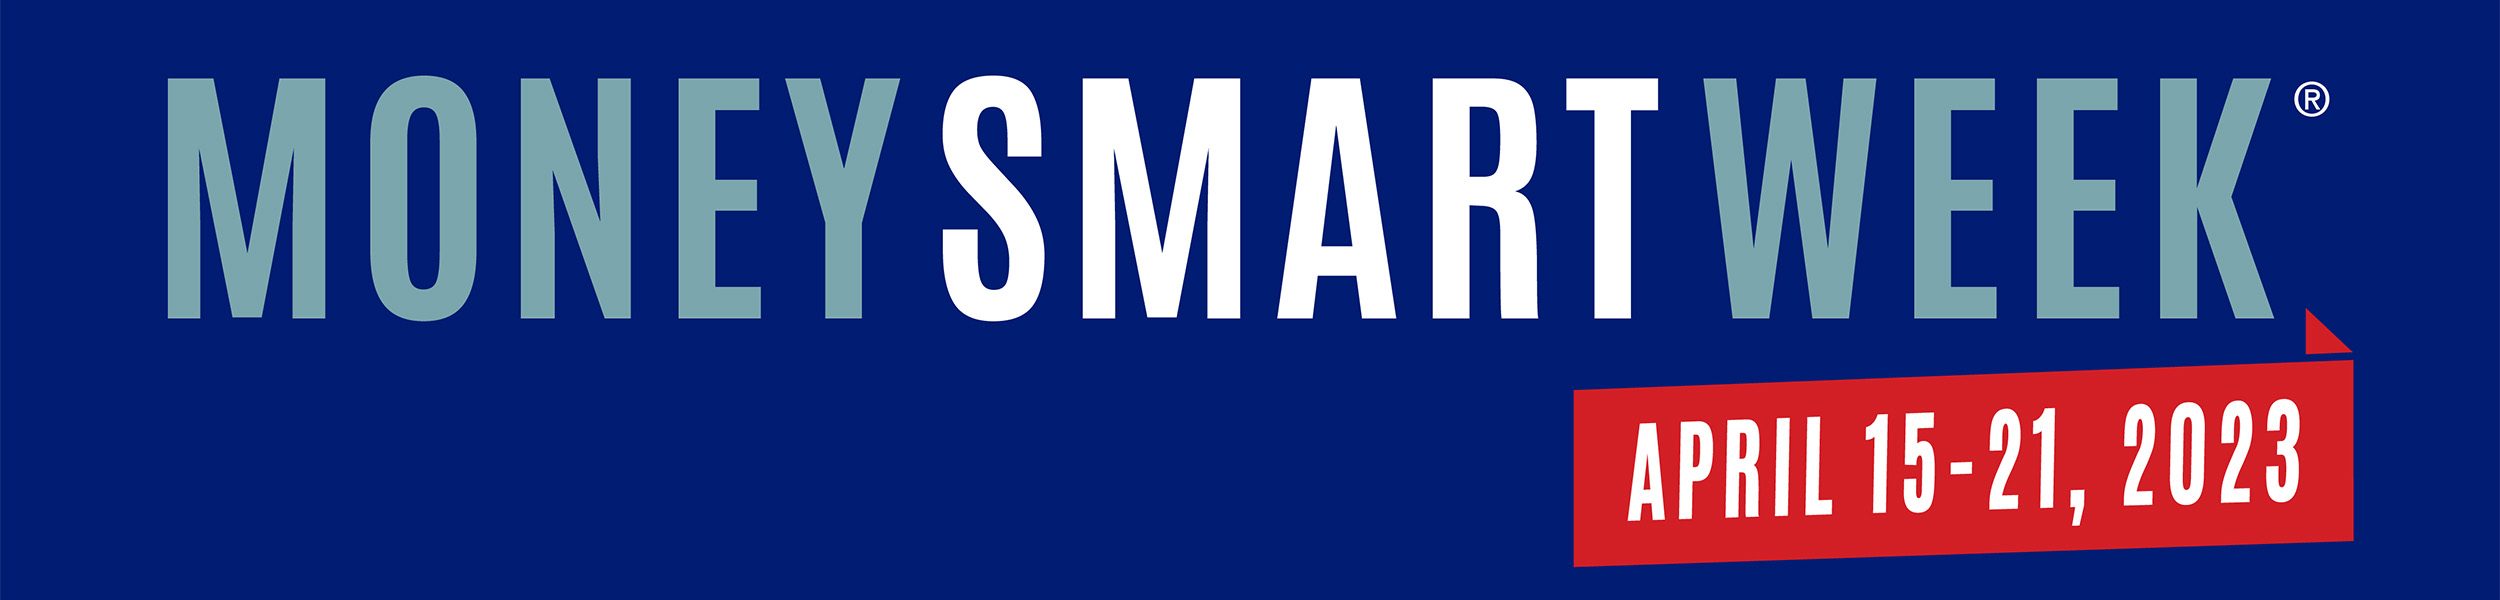 logo and date of Money Smart Week of 2023